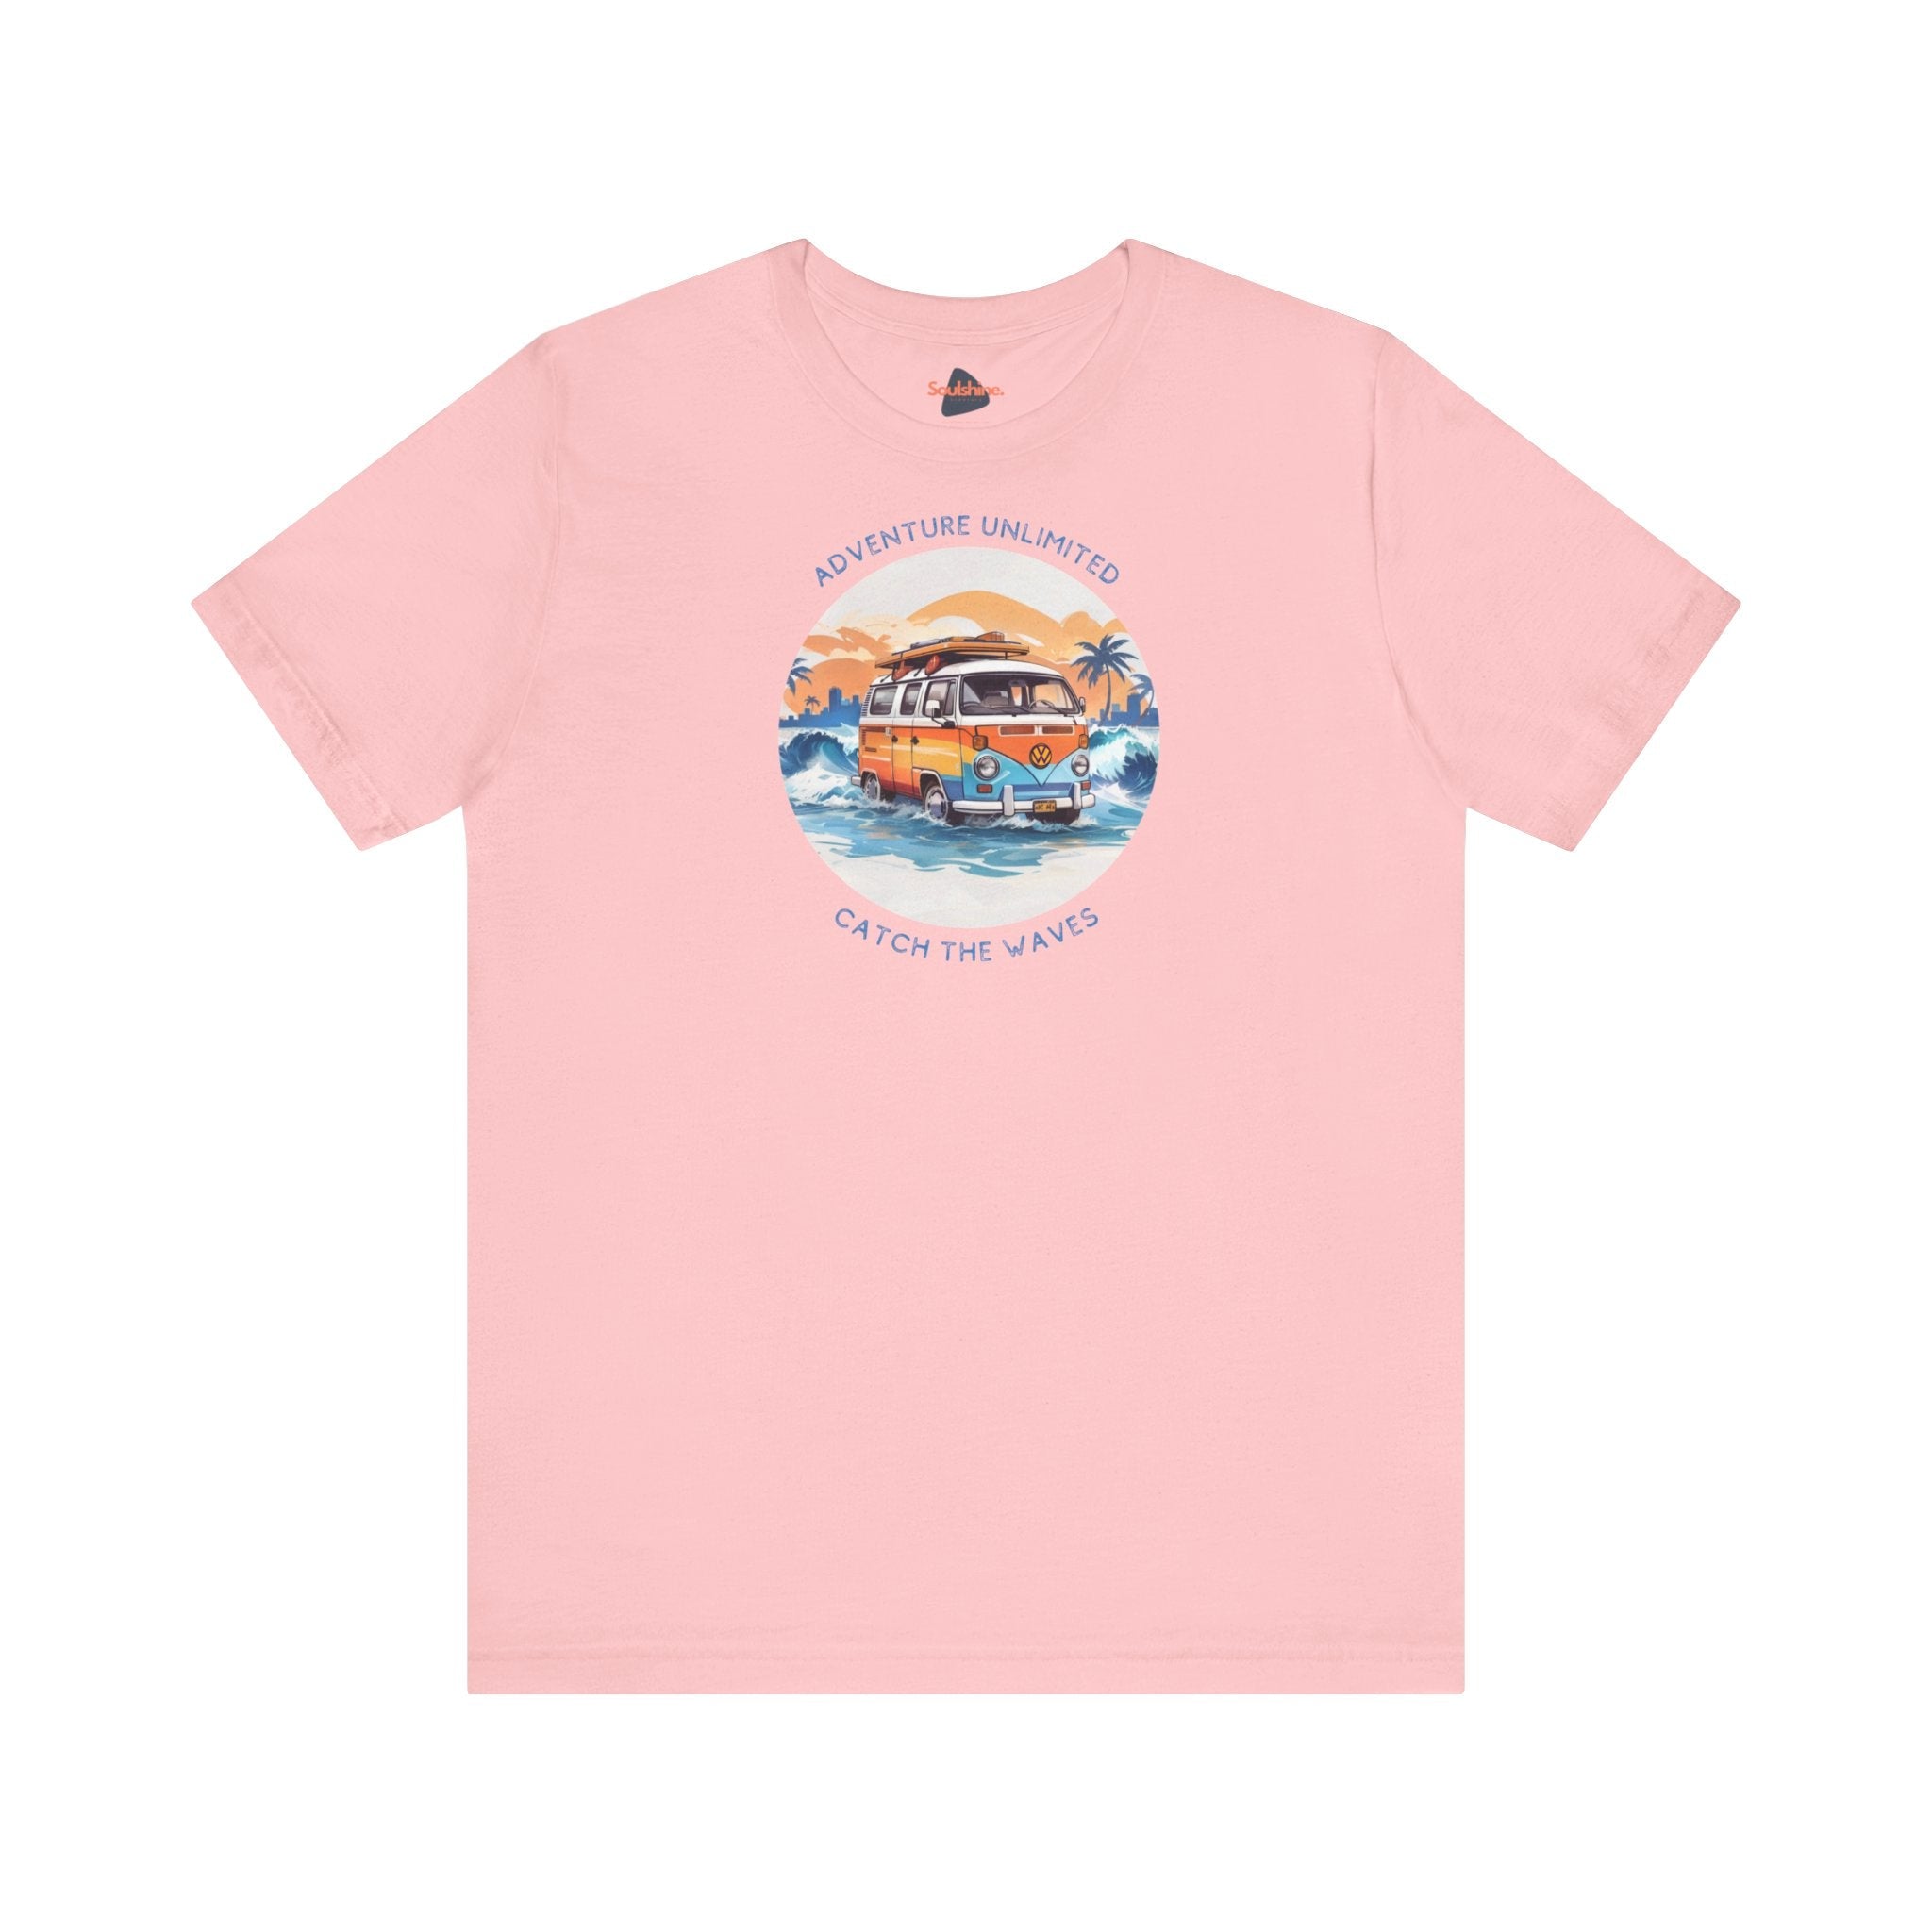 Printed pink t shirt with car graphic and Adventure Unlimited text on Bella & Canvas item